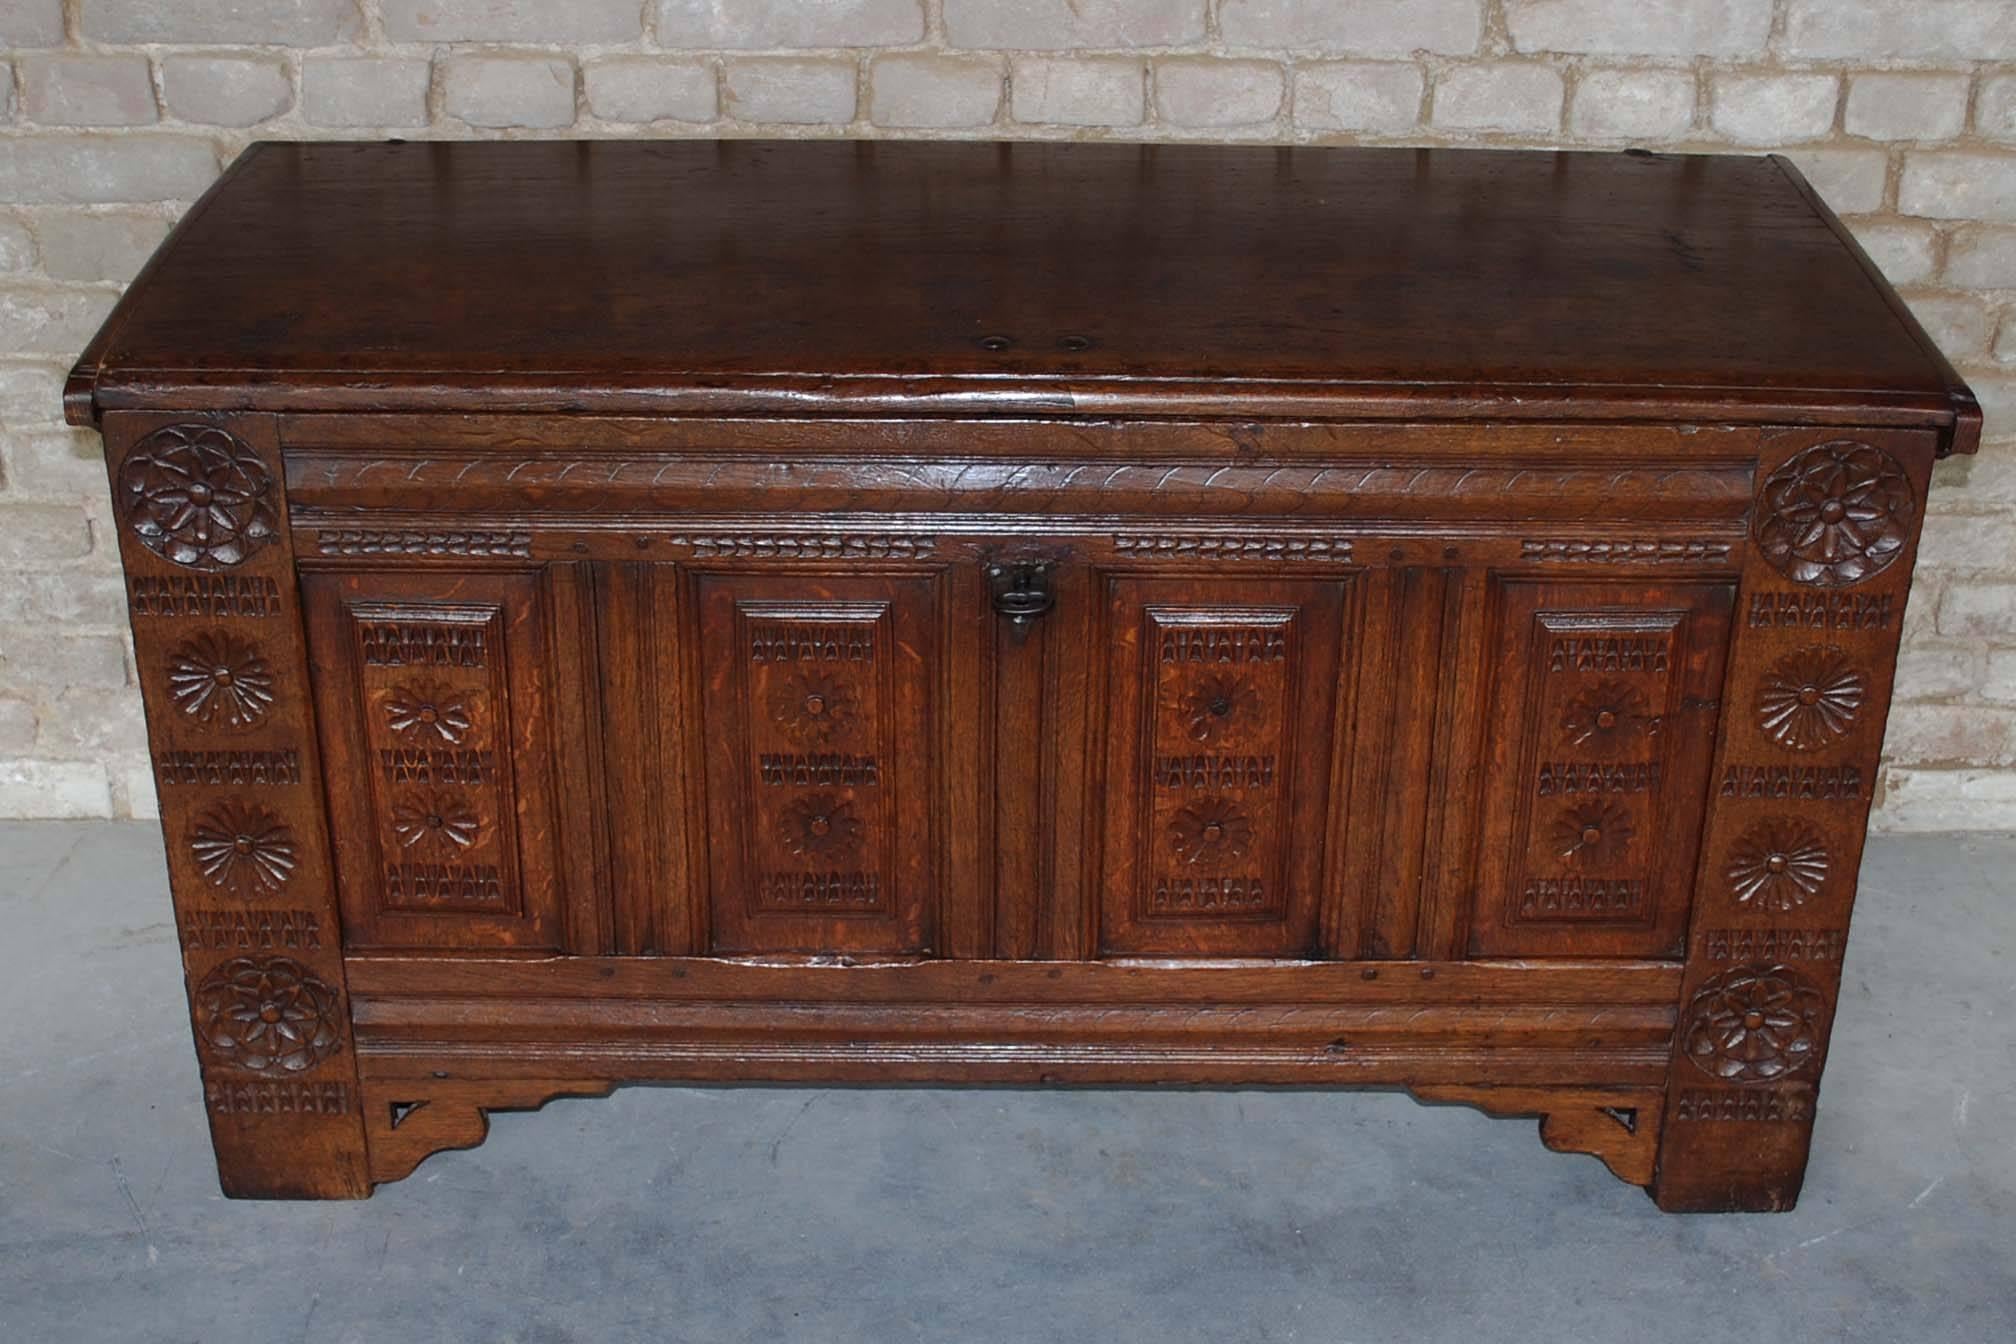 This solid oak carved chest was made in circa 1720 and originated in the Netherlands.
It is made in Rebaissance style and it has the typical elevated panels in the front section.
The front has beautiful geometric carvings. It has the original lock